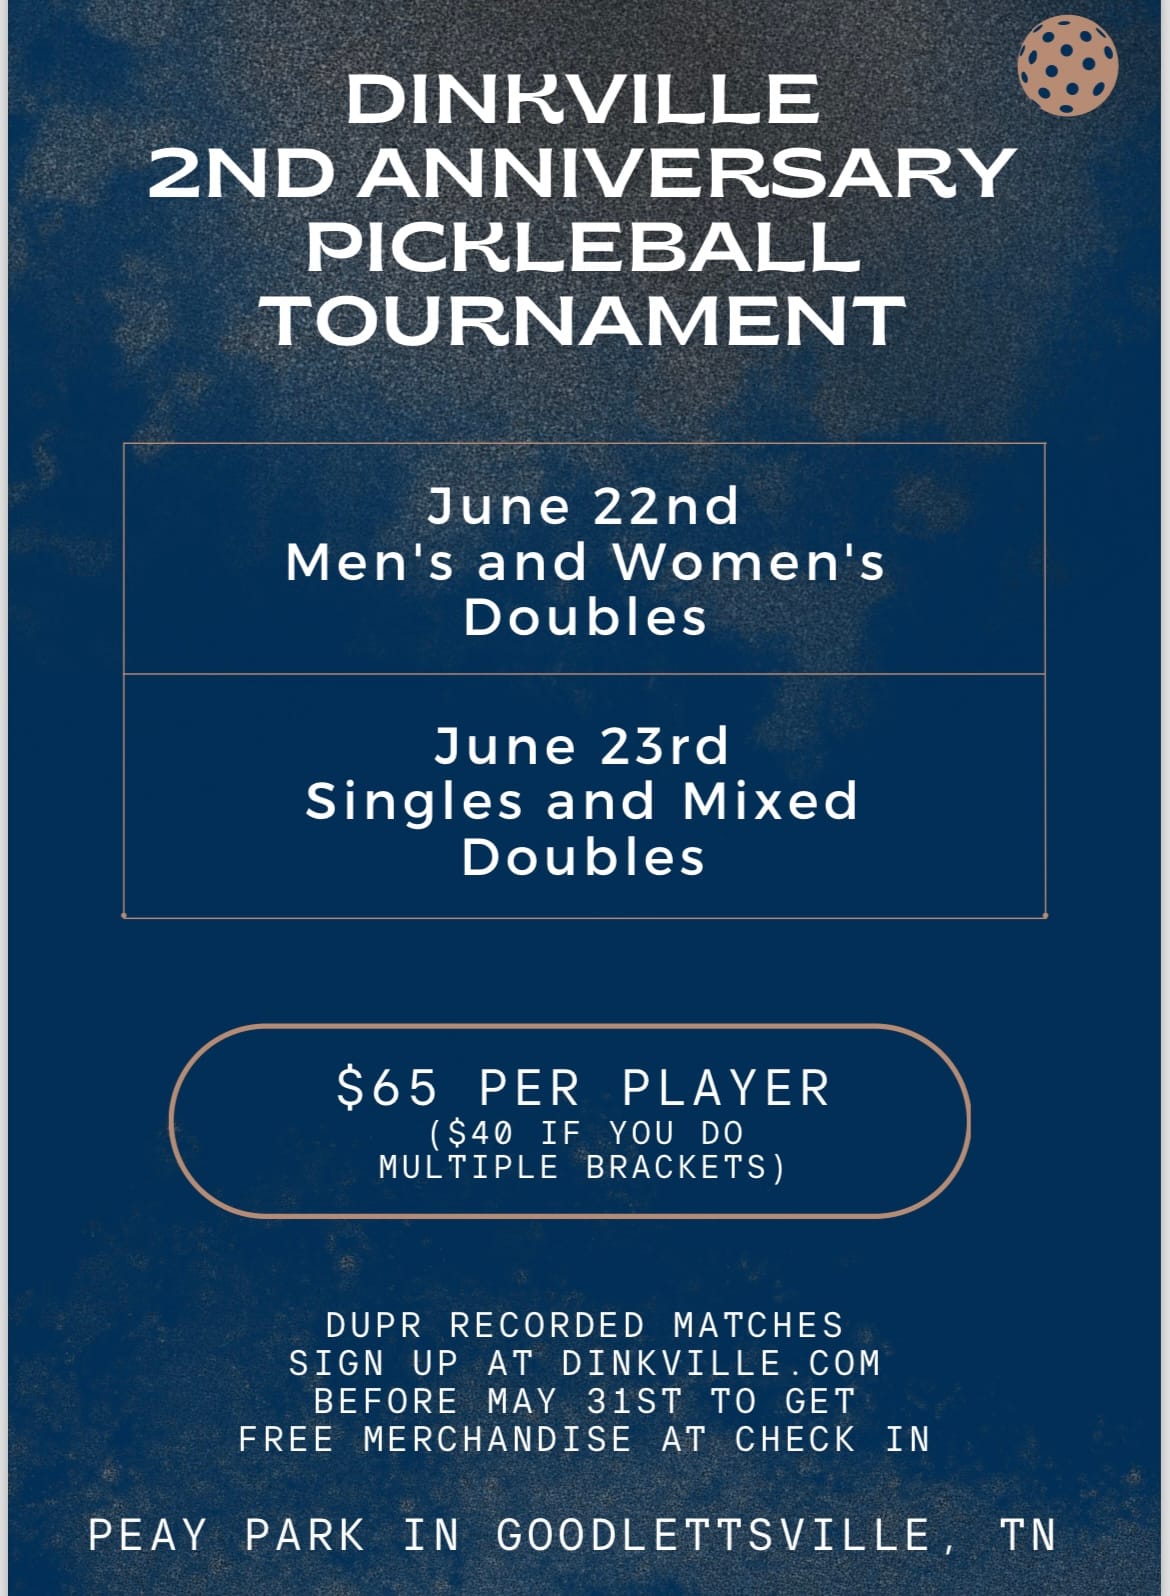 Dinkville's 2nd Anniversary Tournament on June 22nd-23rd